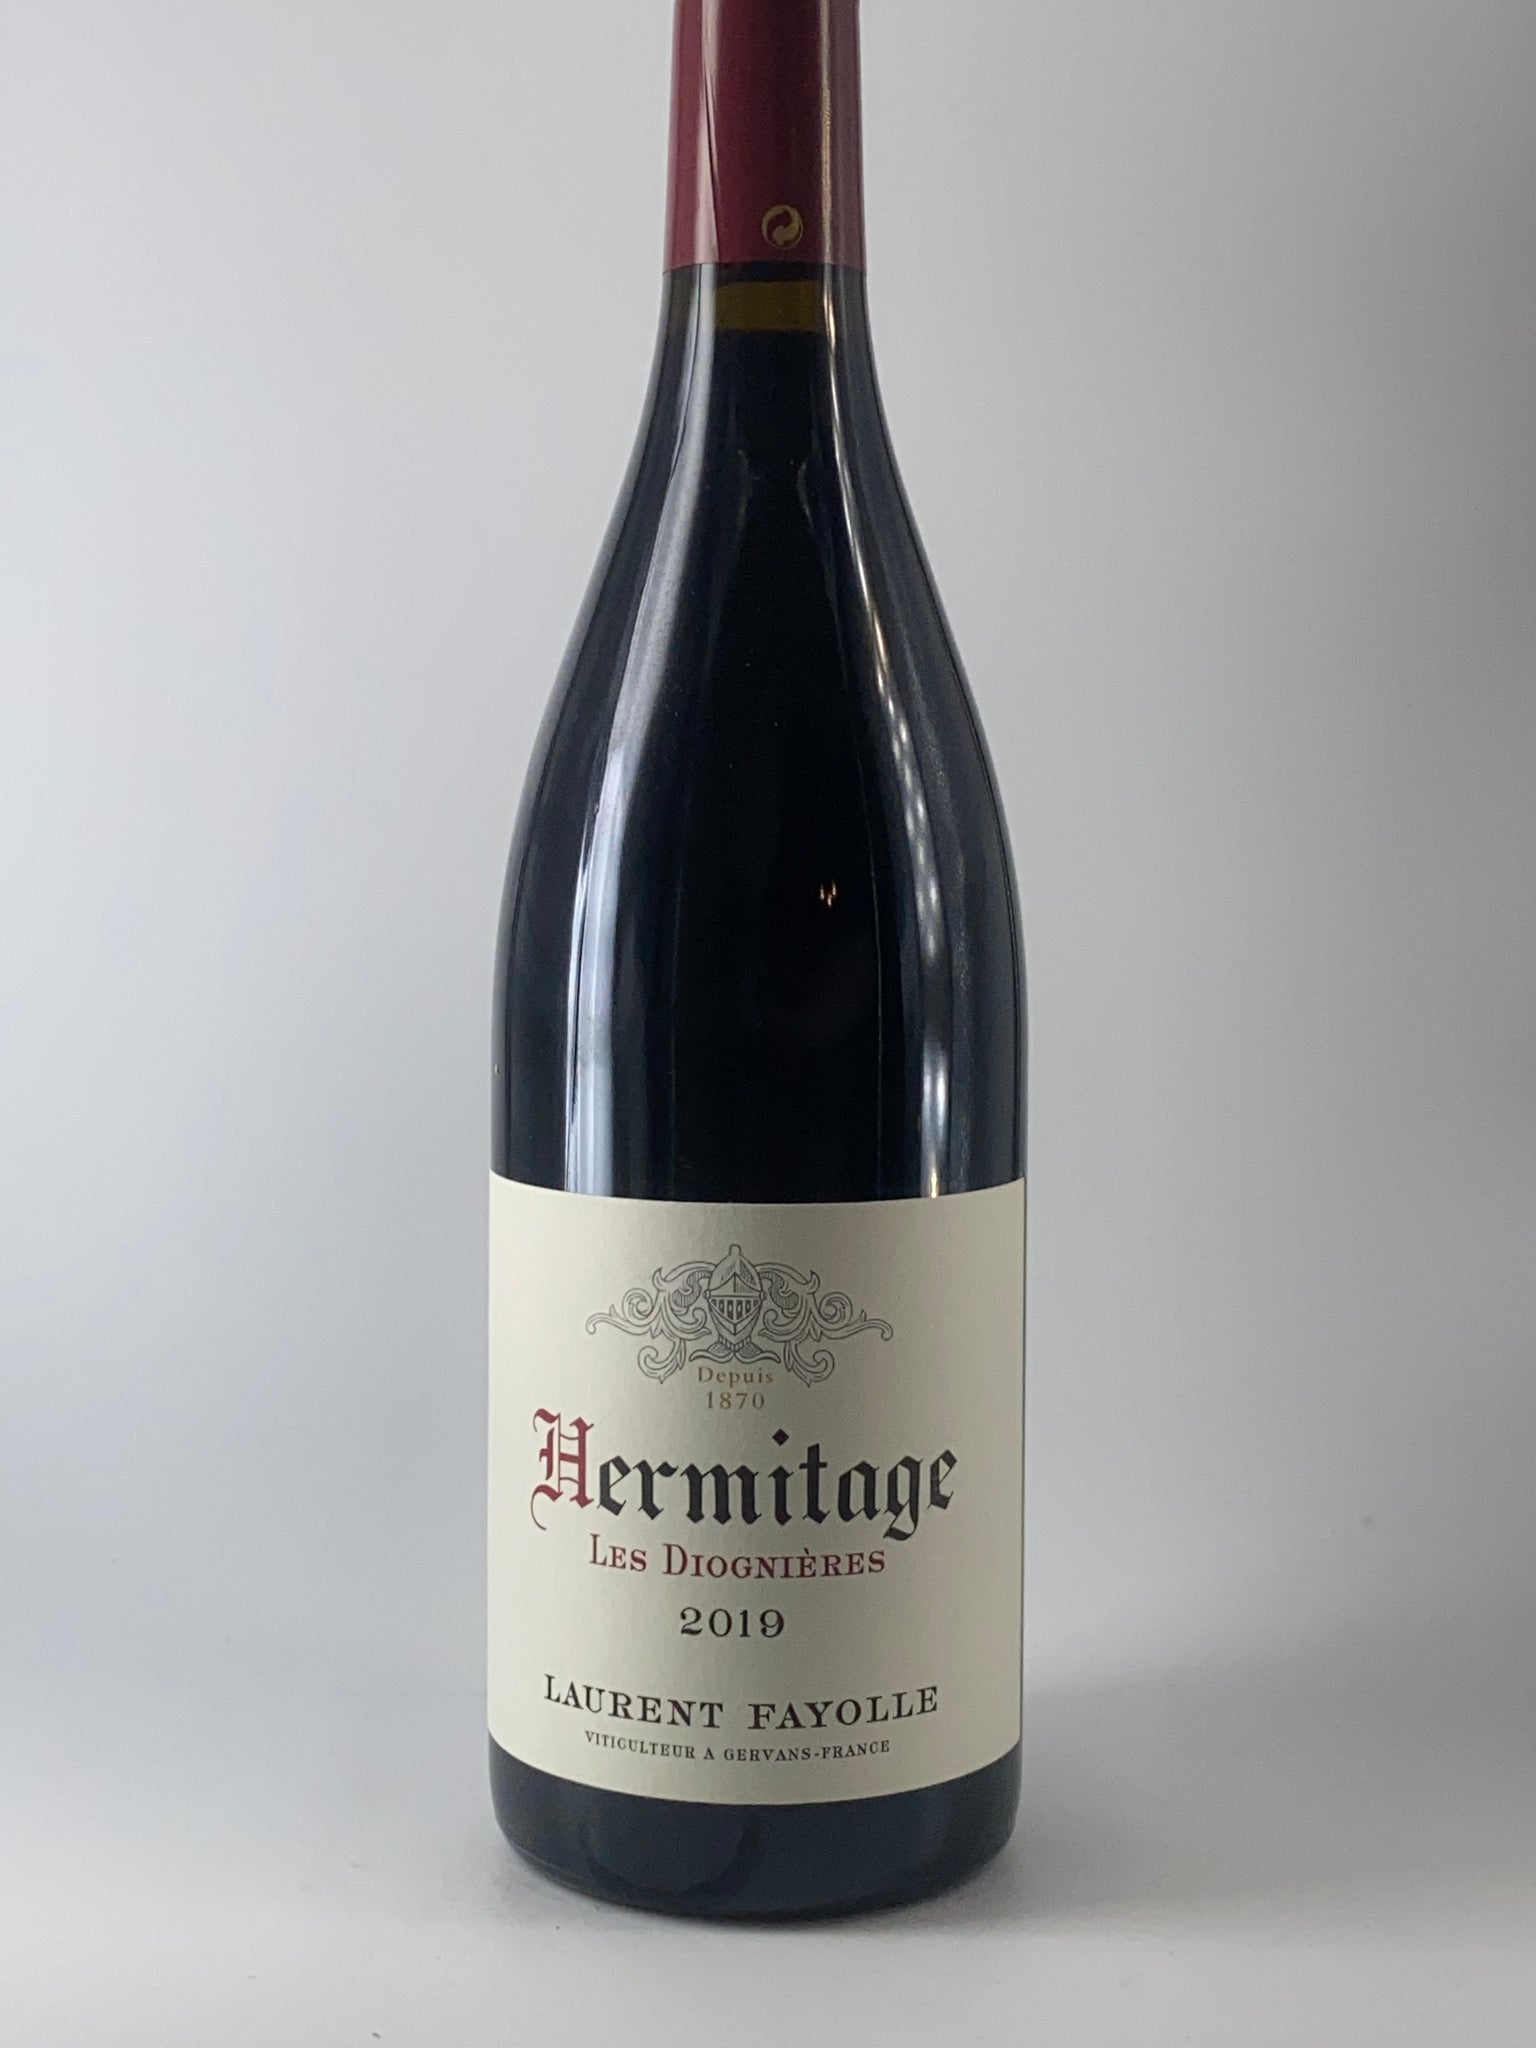 Rhone, Hermitage, Les Diognieres Laurent Fayolle